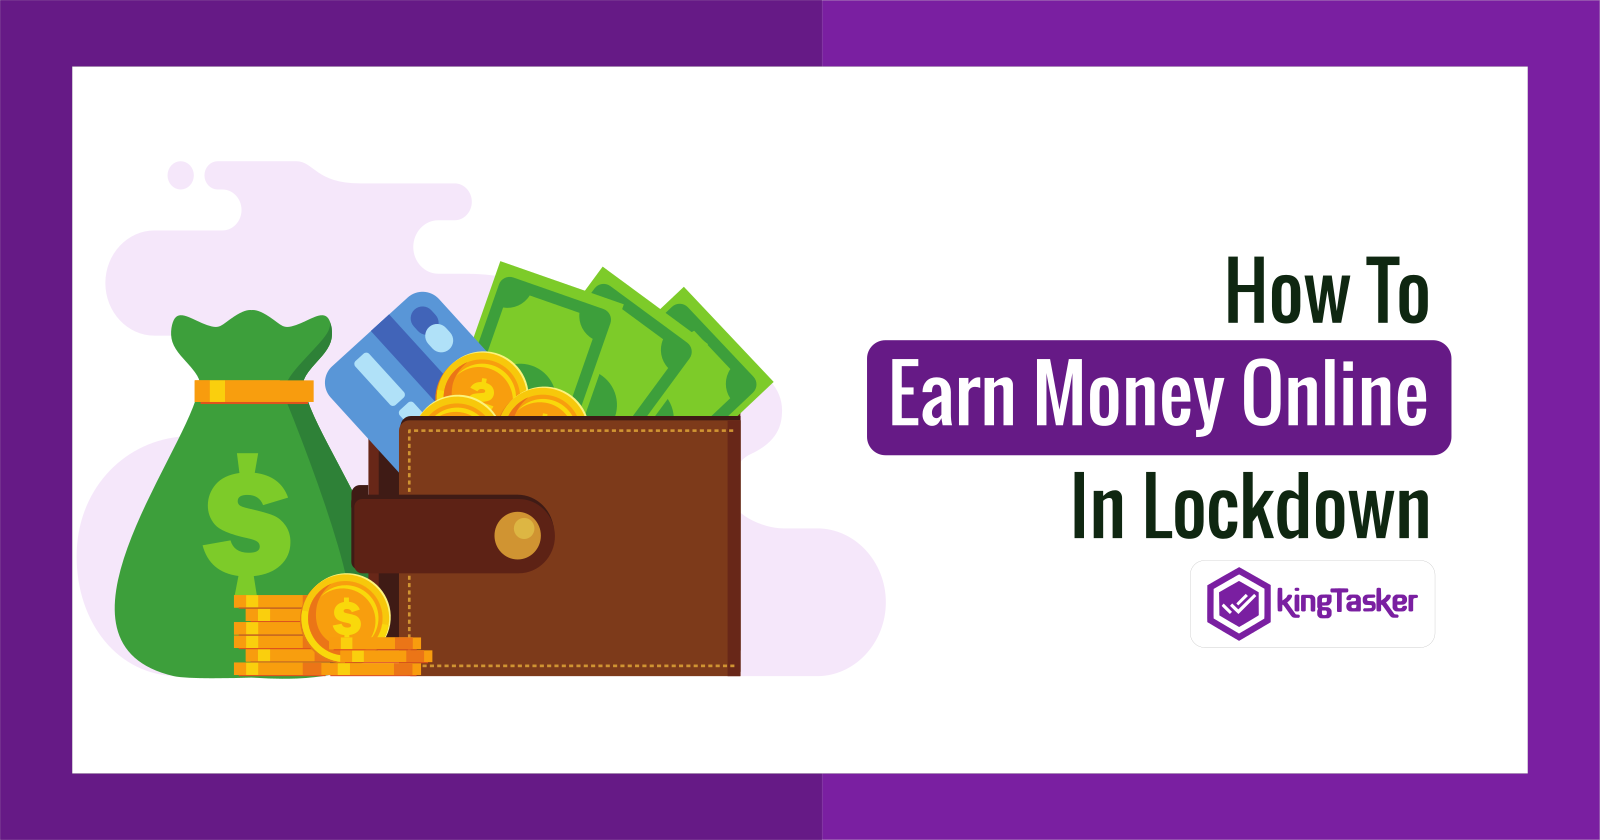 How To Earn Money Online in Lockdown: Checkout The Top 7 Ways!